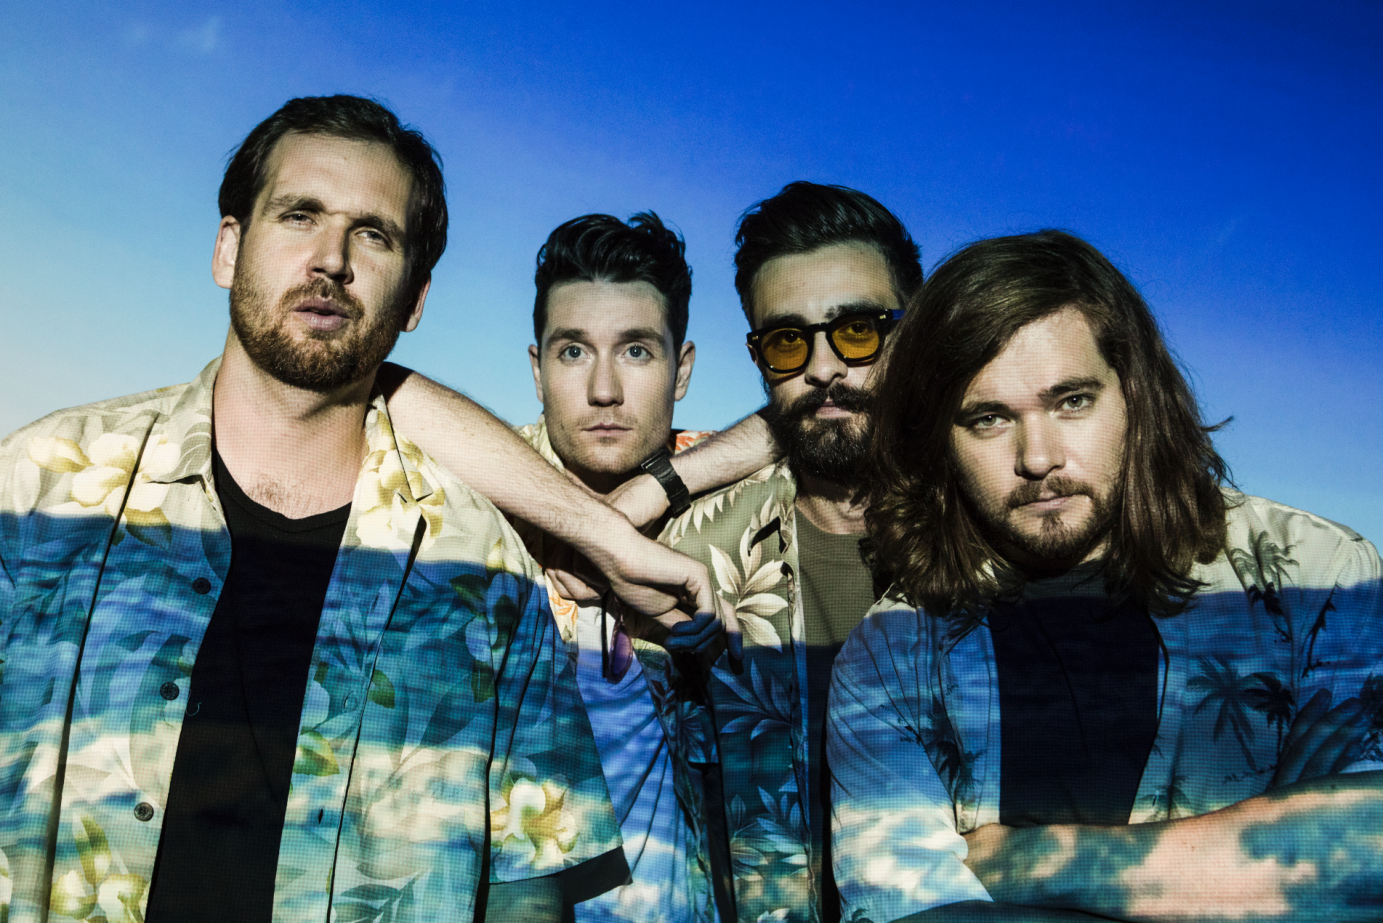 Photography for Bastille by FionaGarden